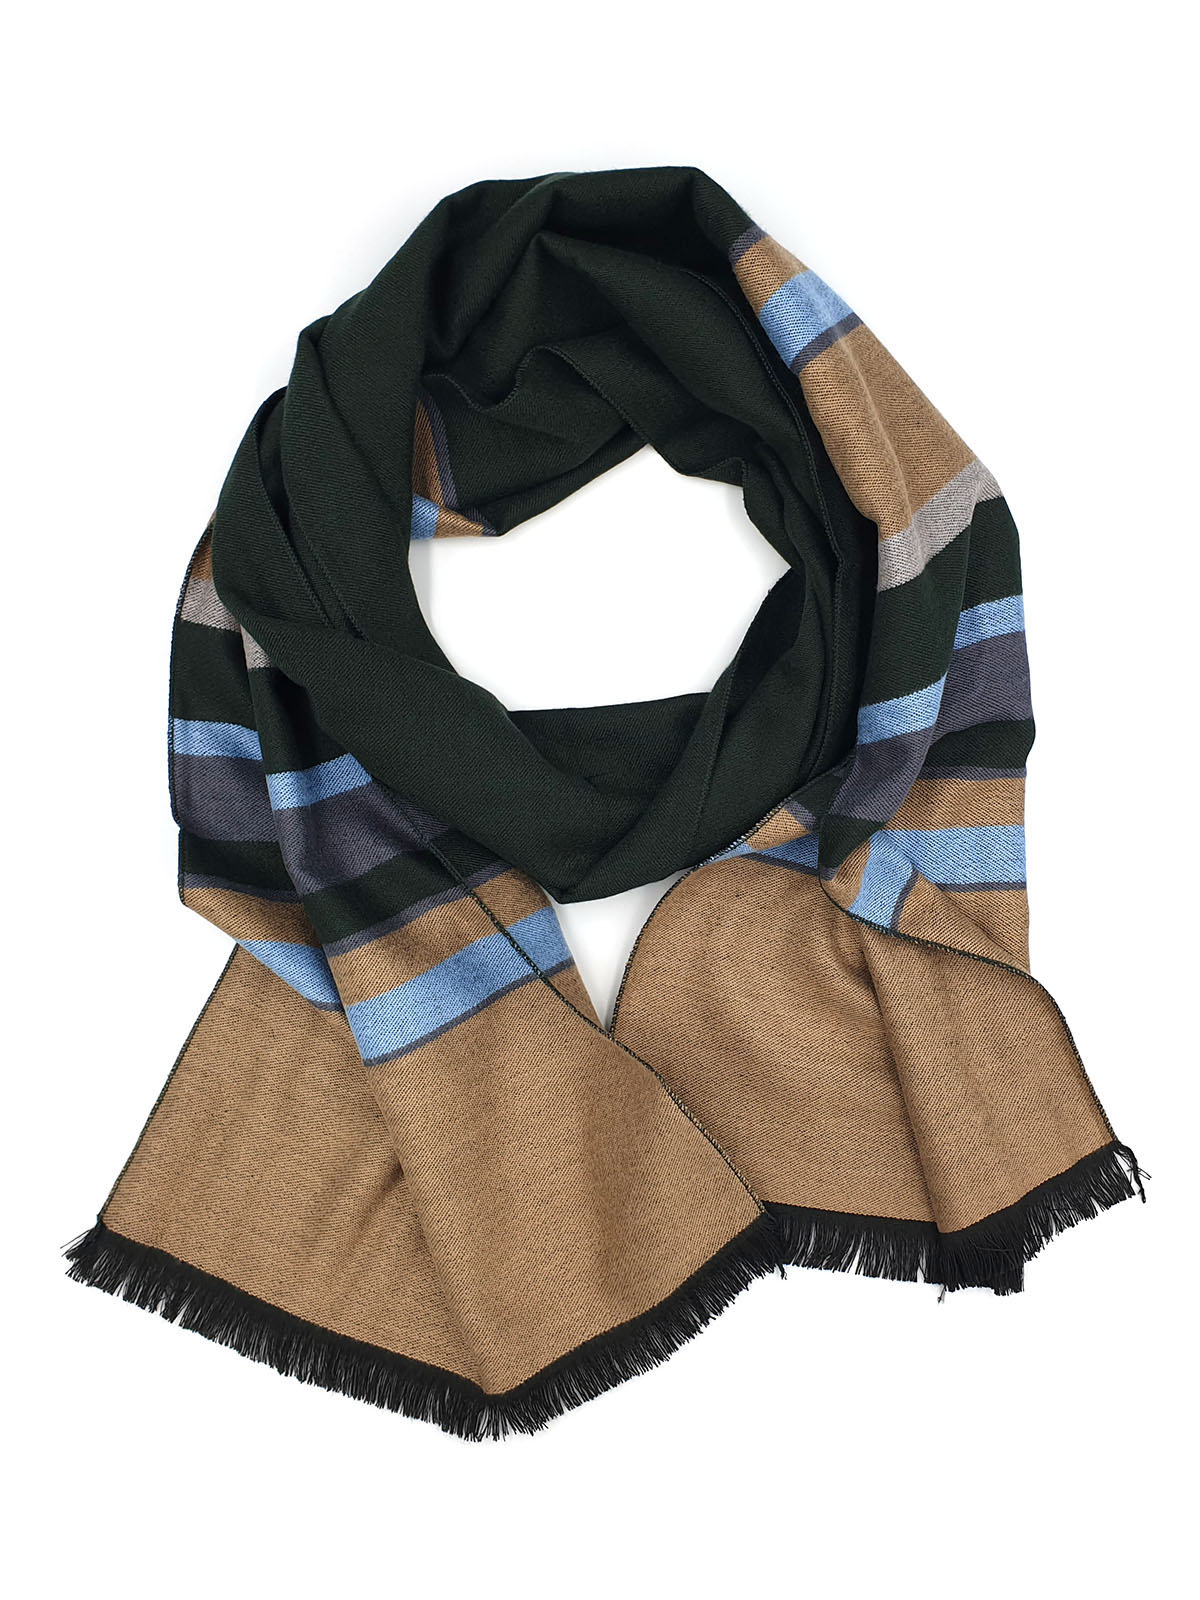 Scarf in black with a colorful stripe - 10350 - € 19.68 img3